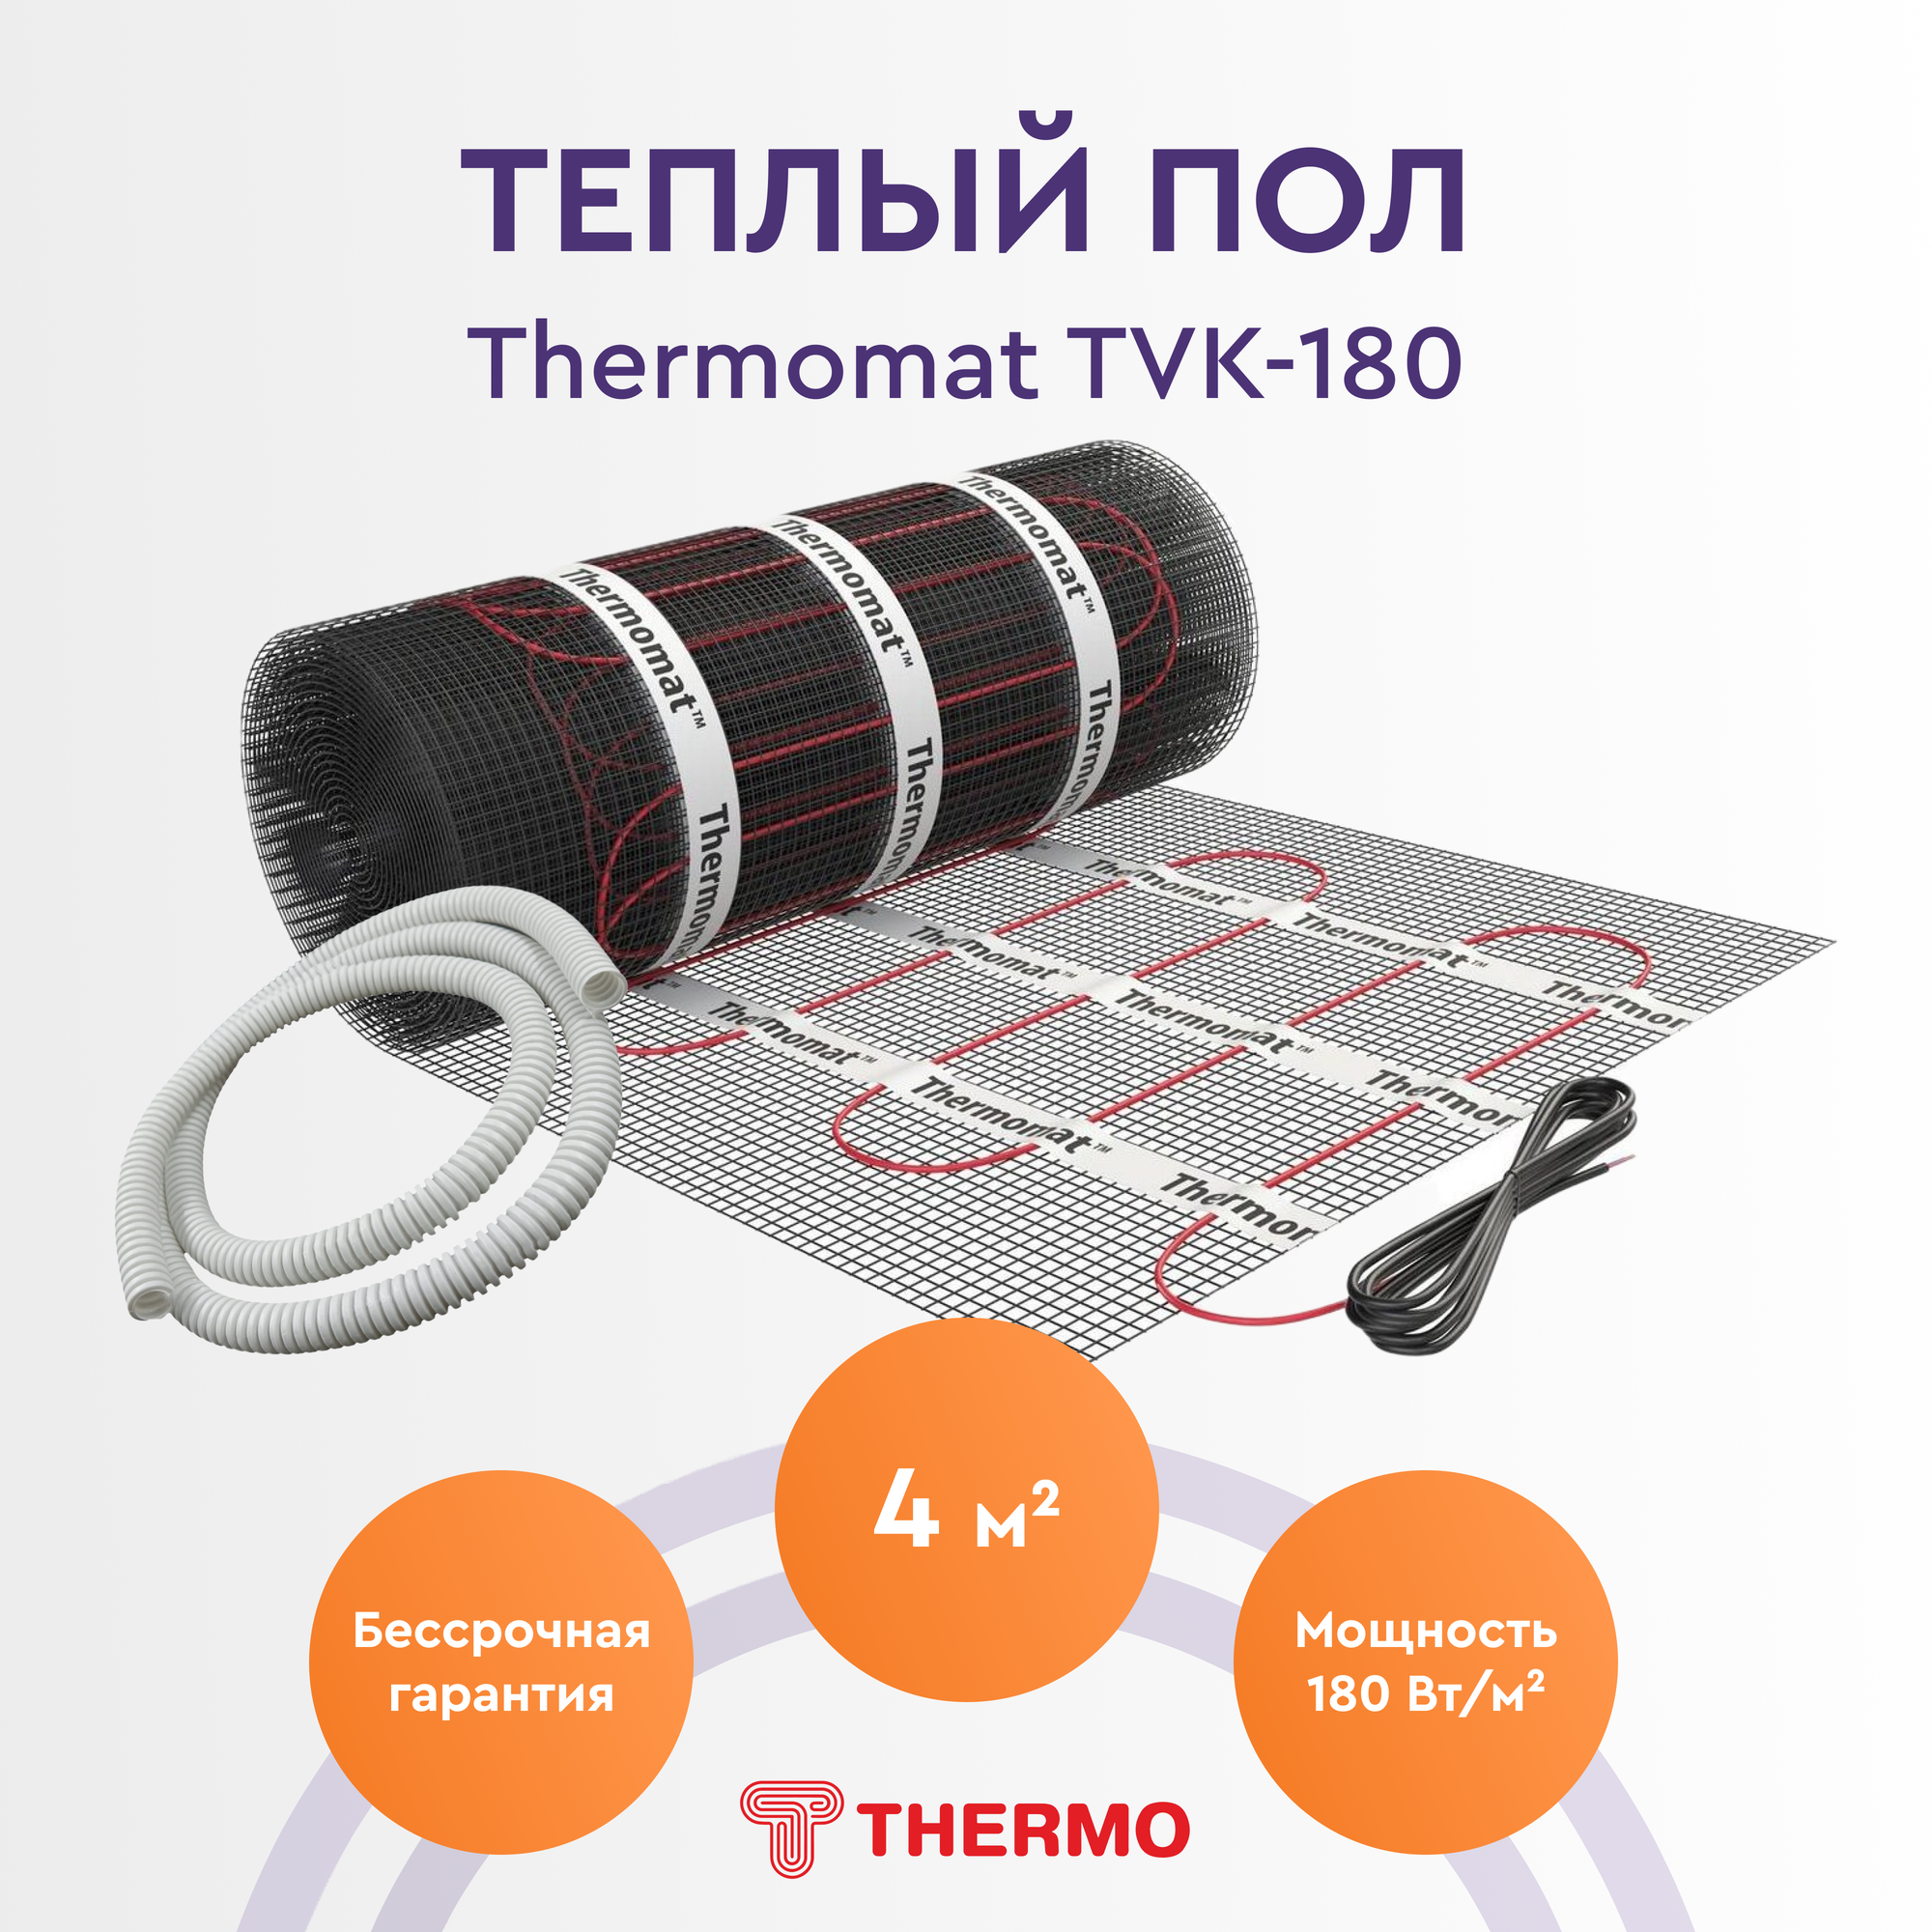 Теплый пол Thermo Thermomat TVK-180 4 м2